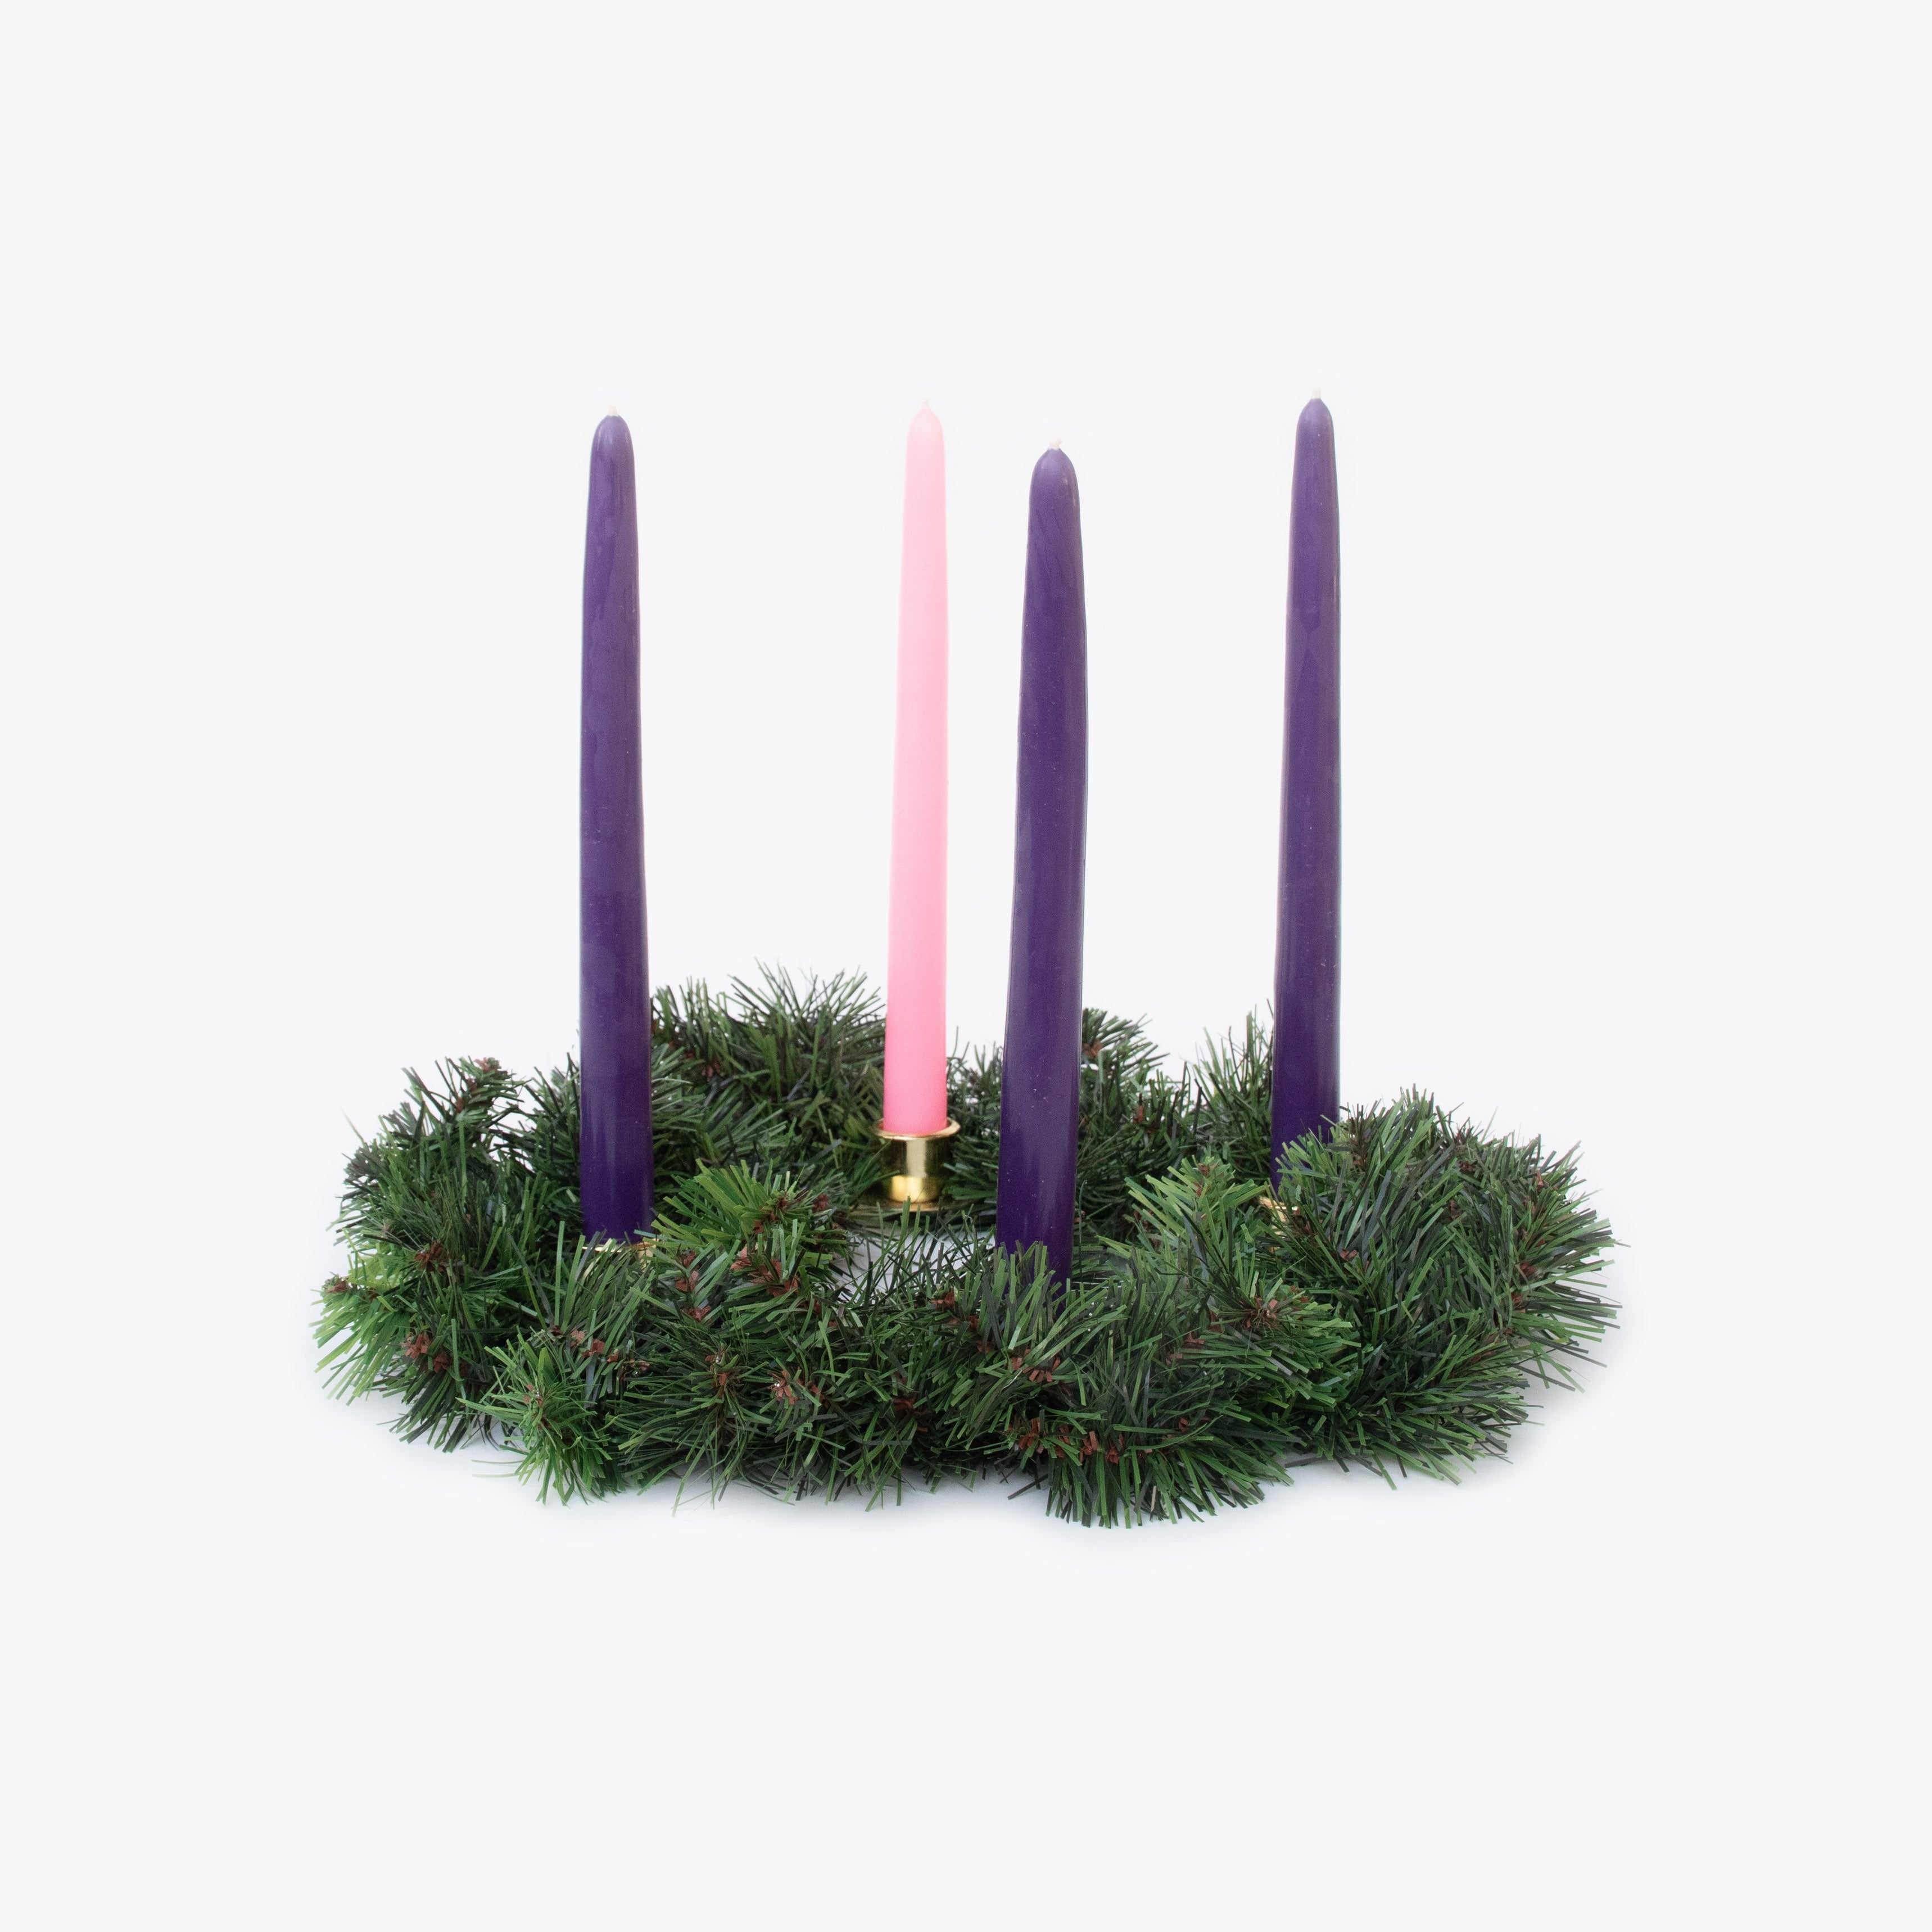 Evergreen Advent Wreath + Candles